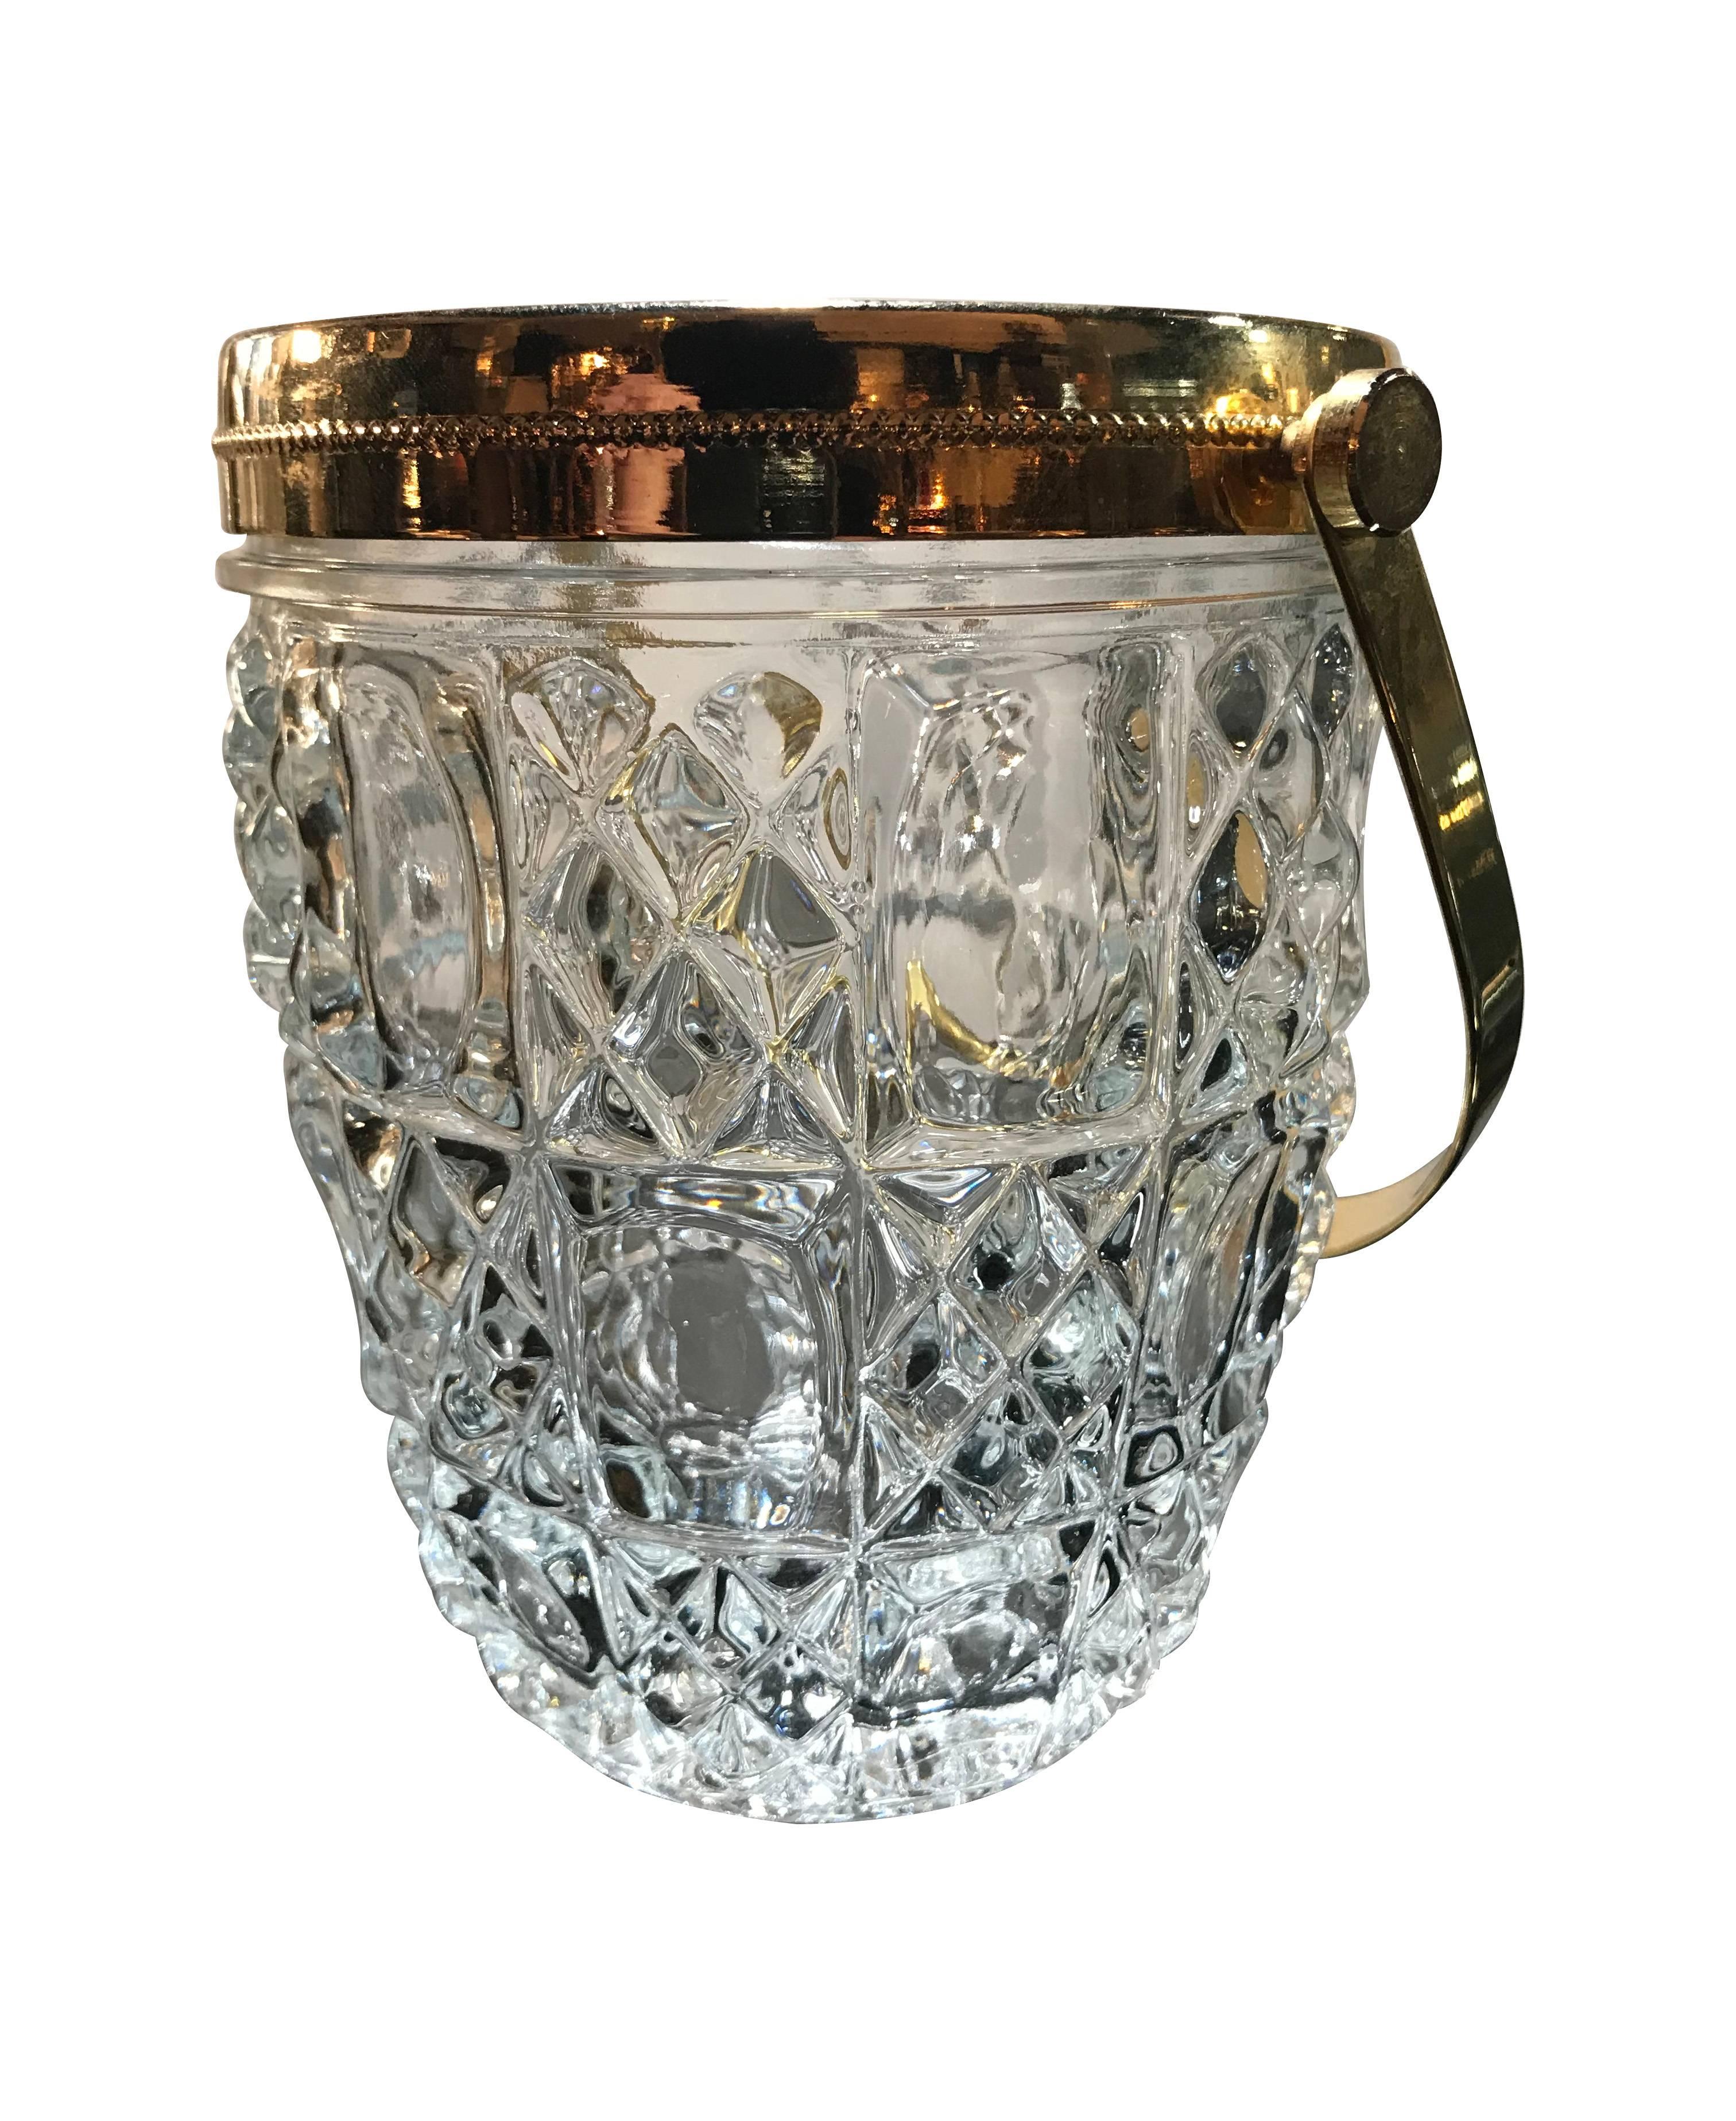 A French faceted glass ice bucket with gilt metal rim and handle.